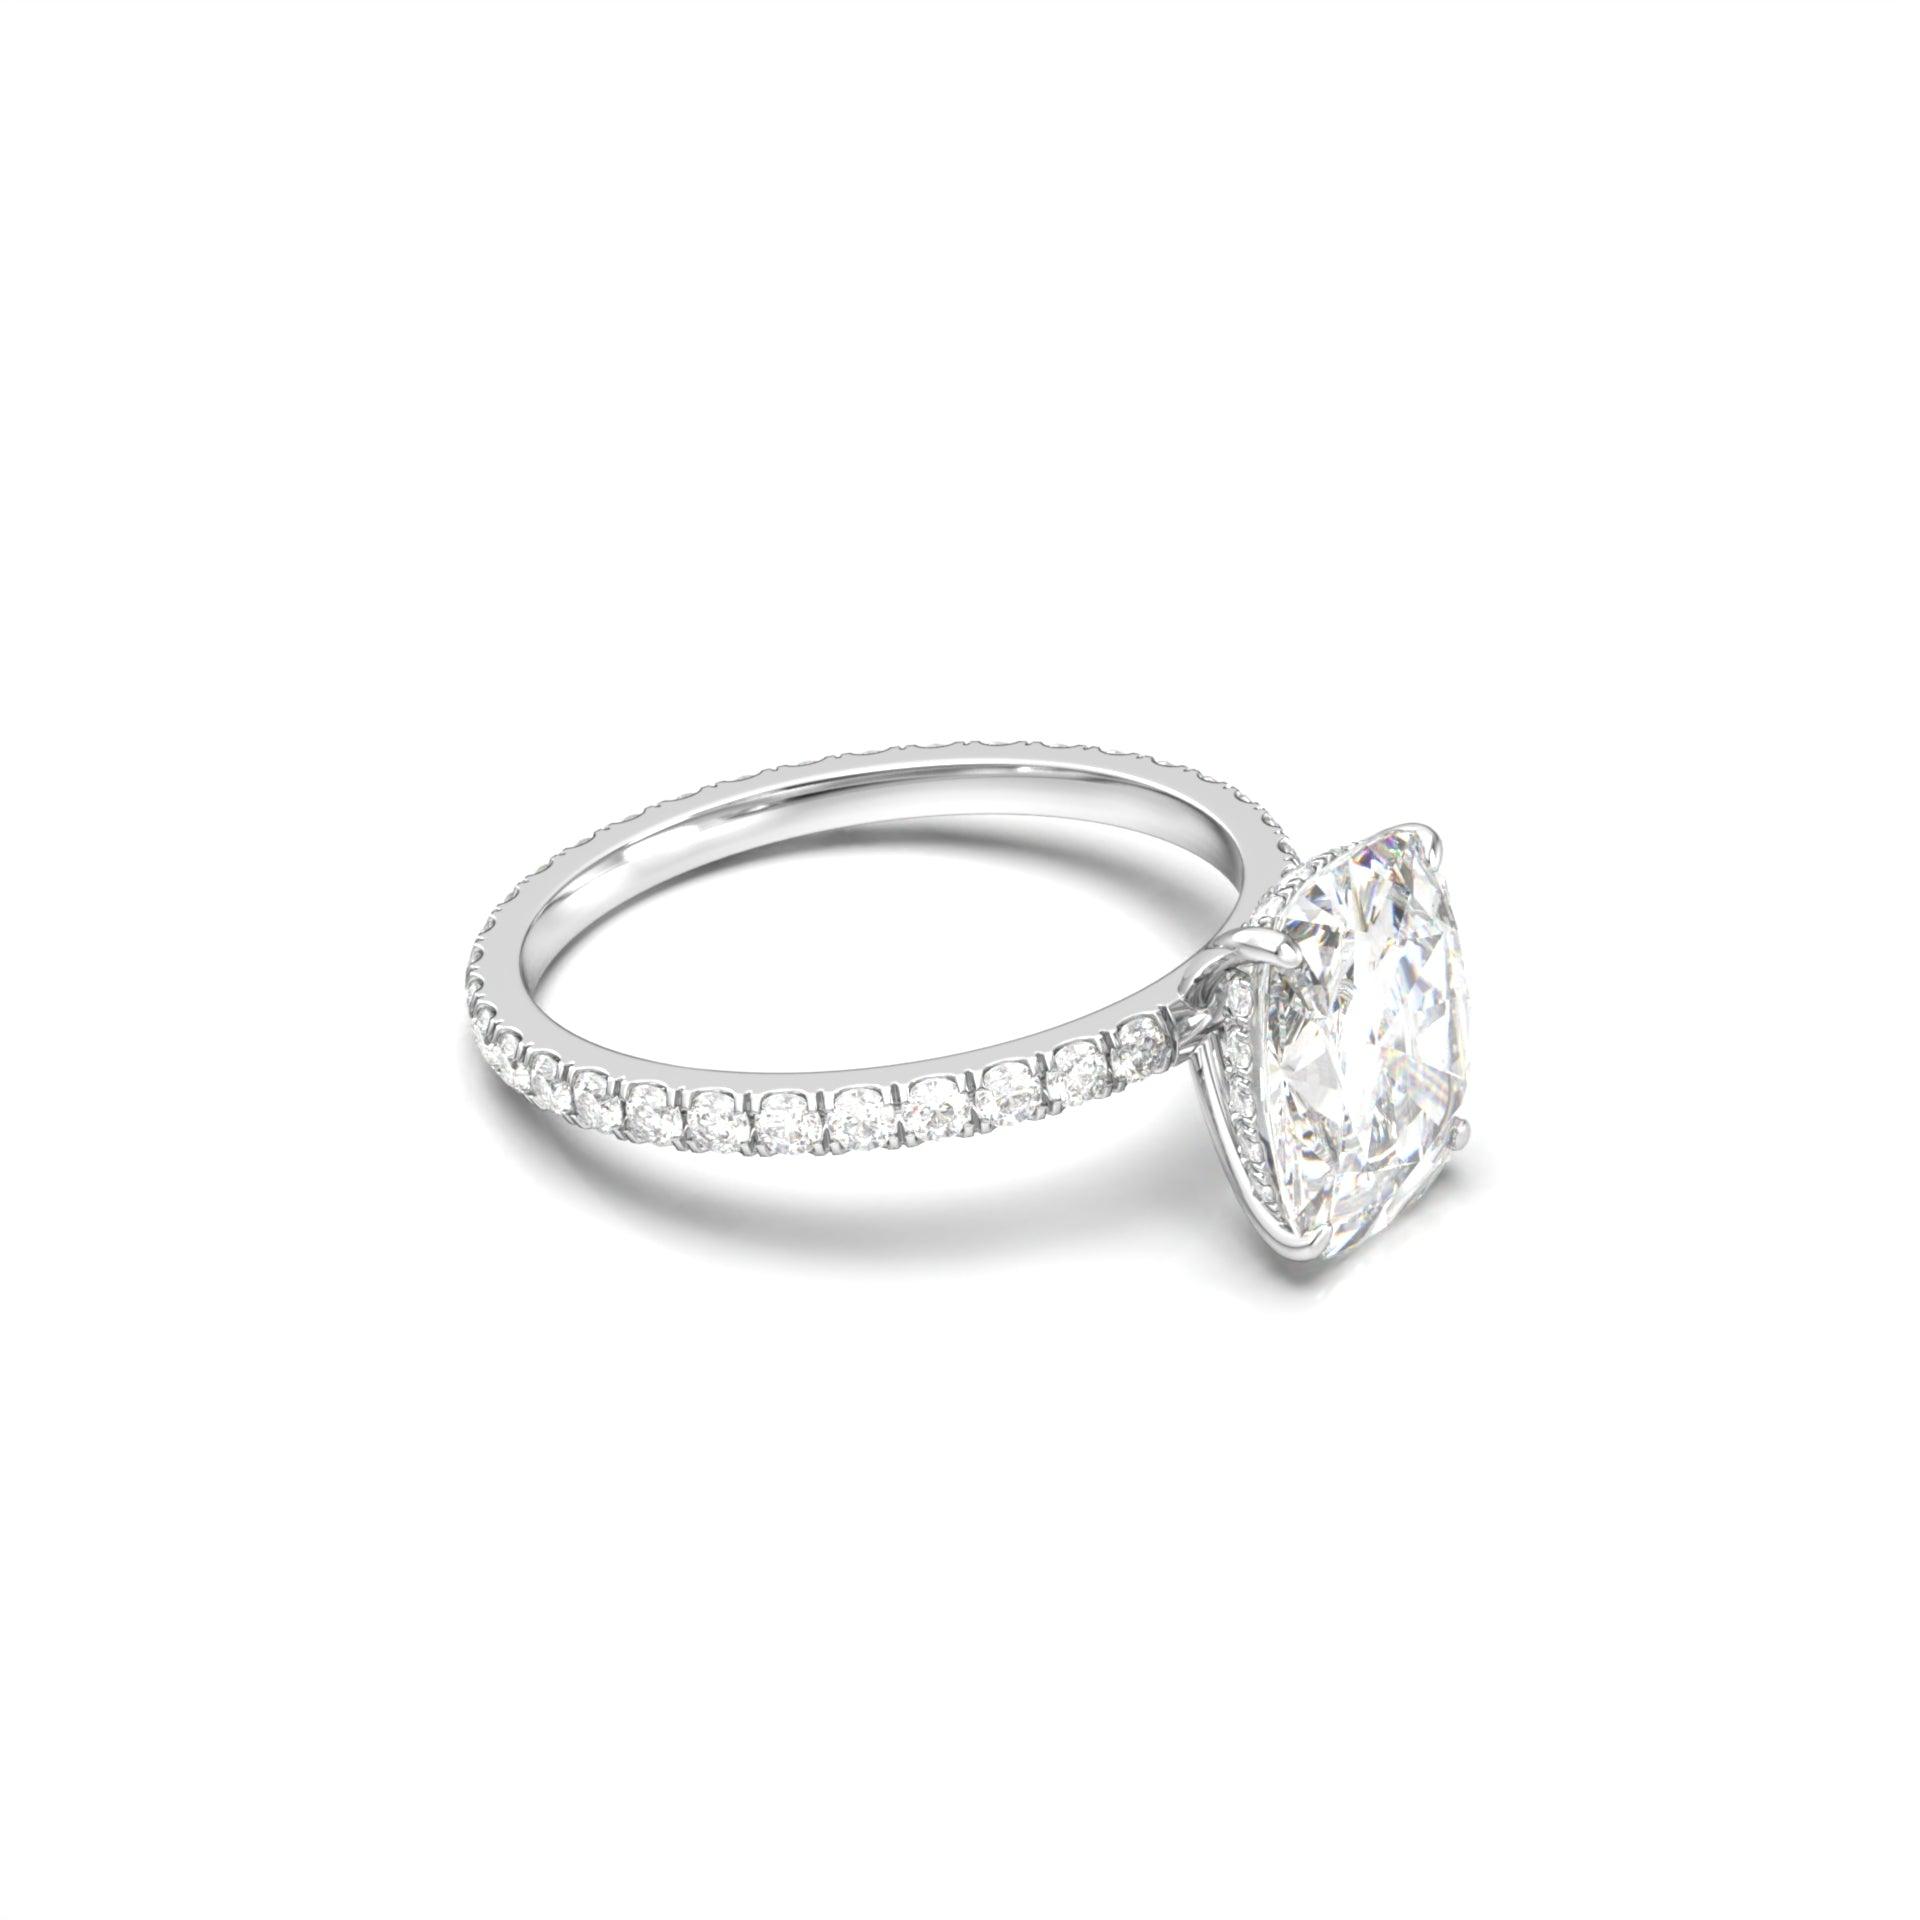 Cushion Cut With Hidden Halo And Full Pavé Moissanite Engagement Ring - moissaniteengagementrings